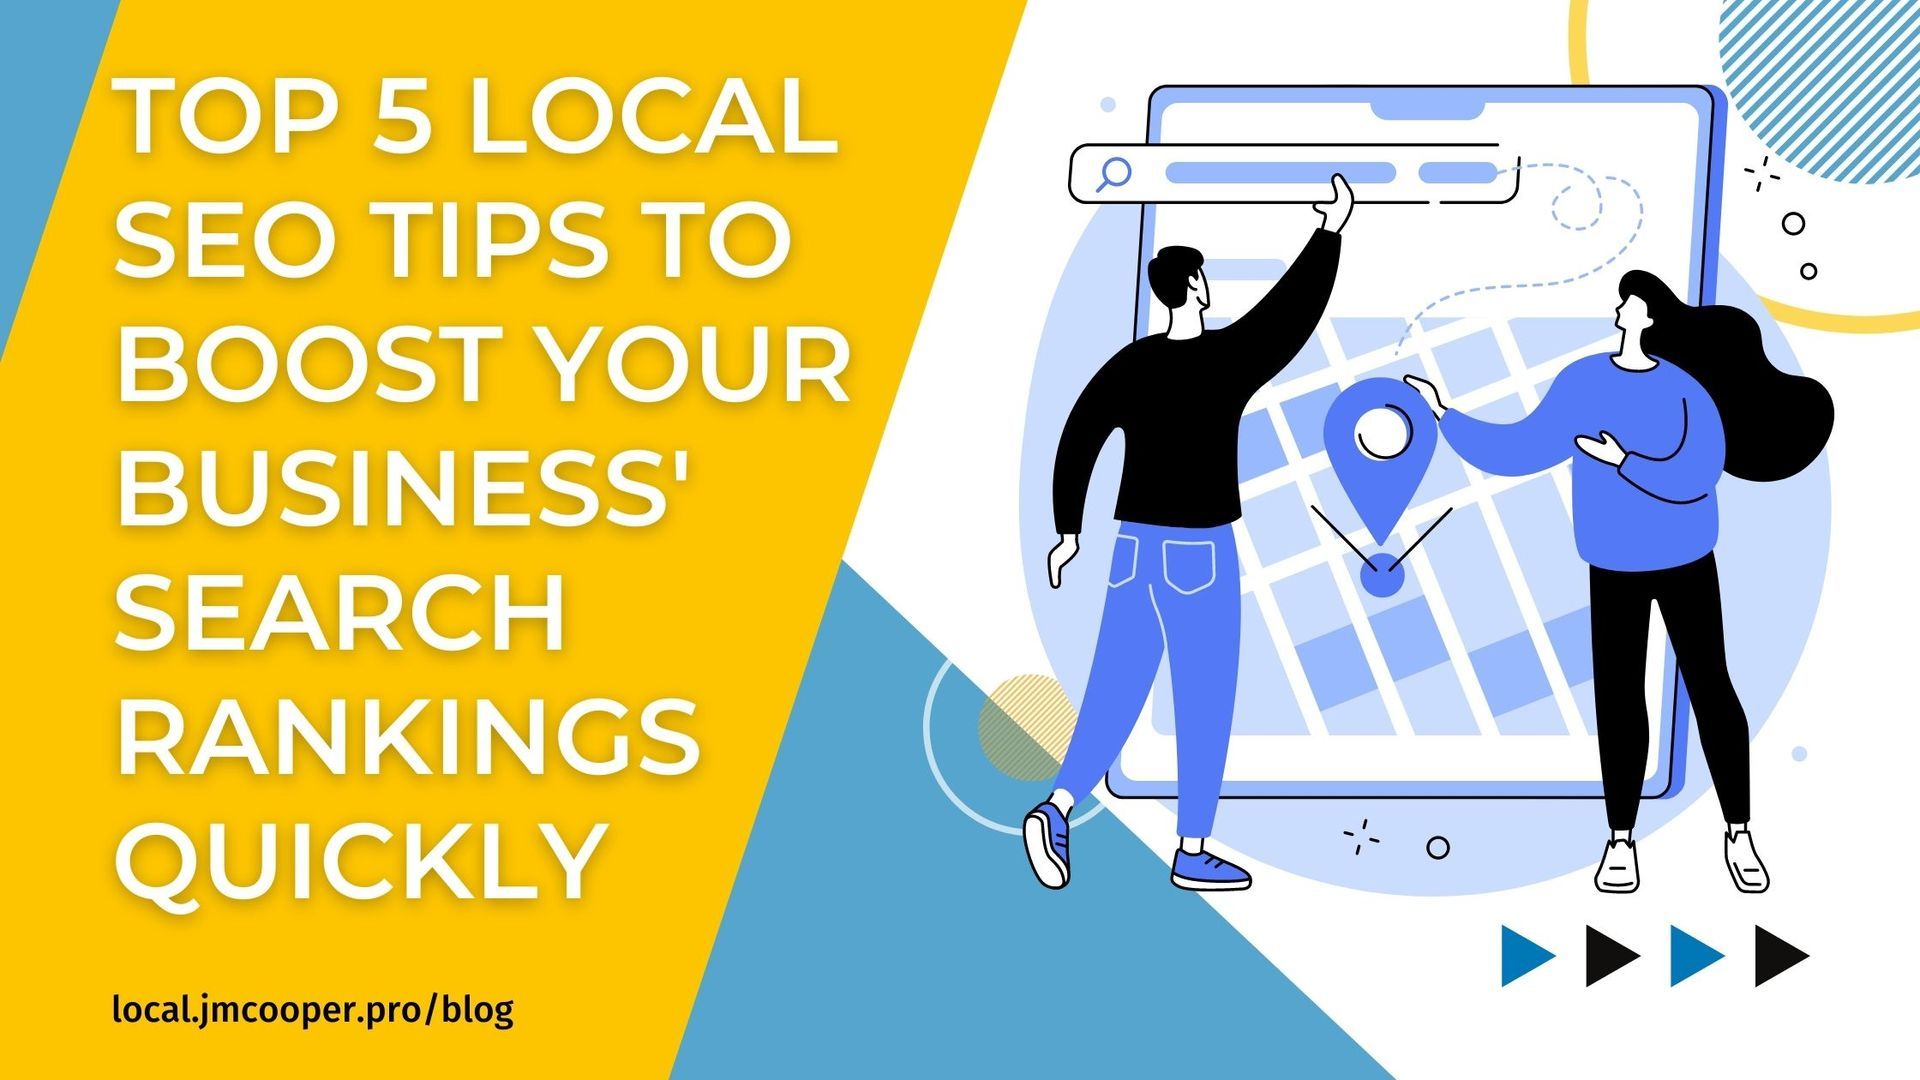 Top 5 Local SEO Tips To Boost Your Business’ Search Rankings Quickly